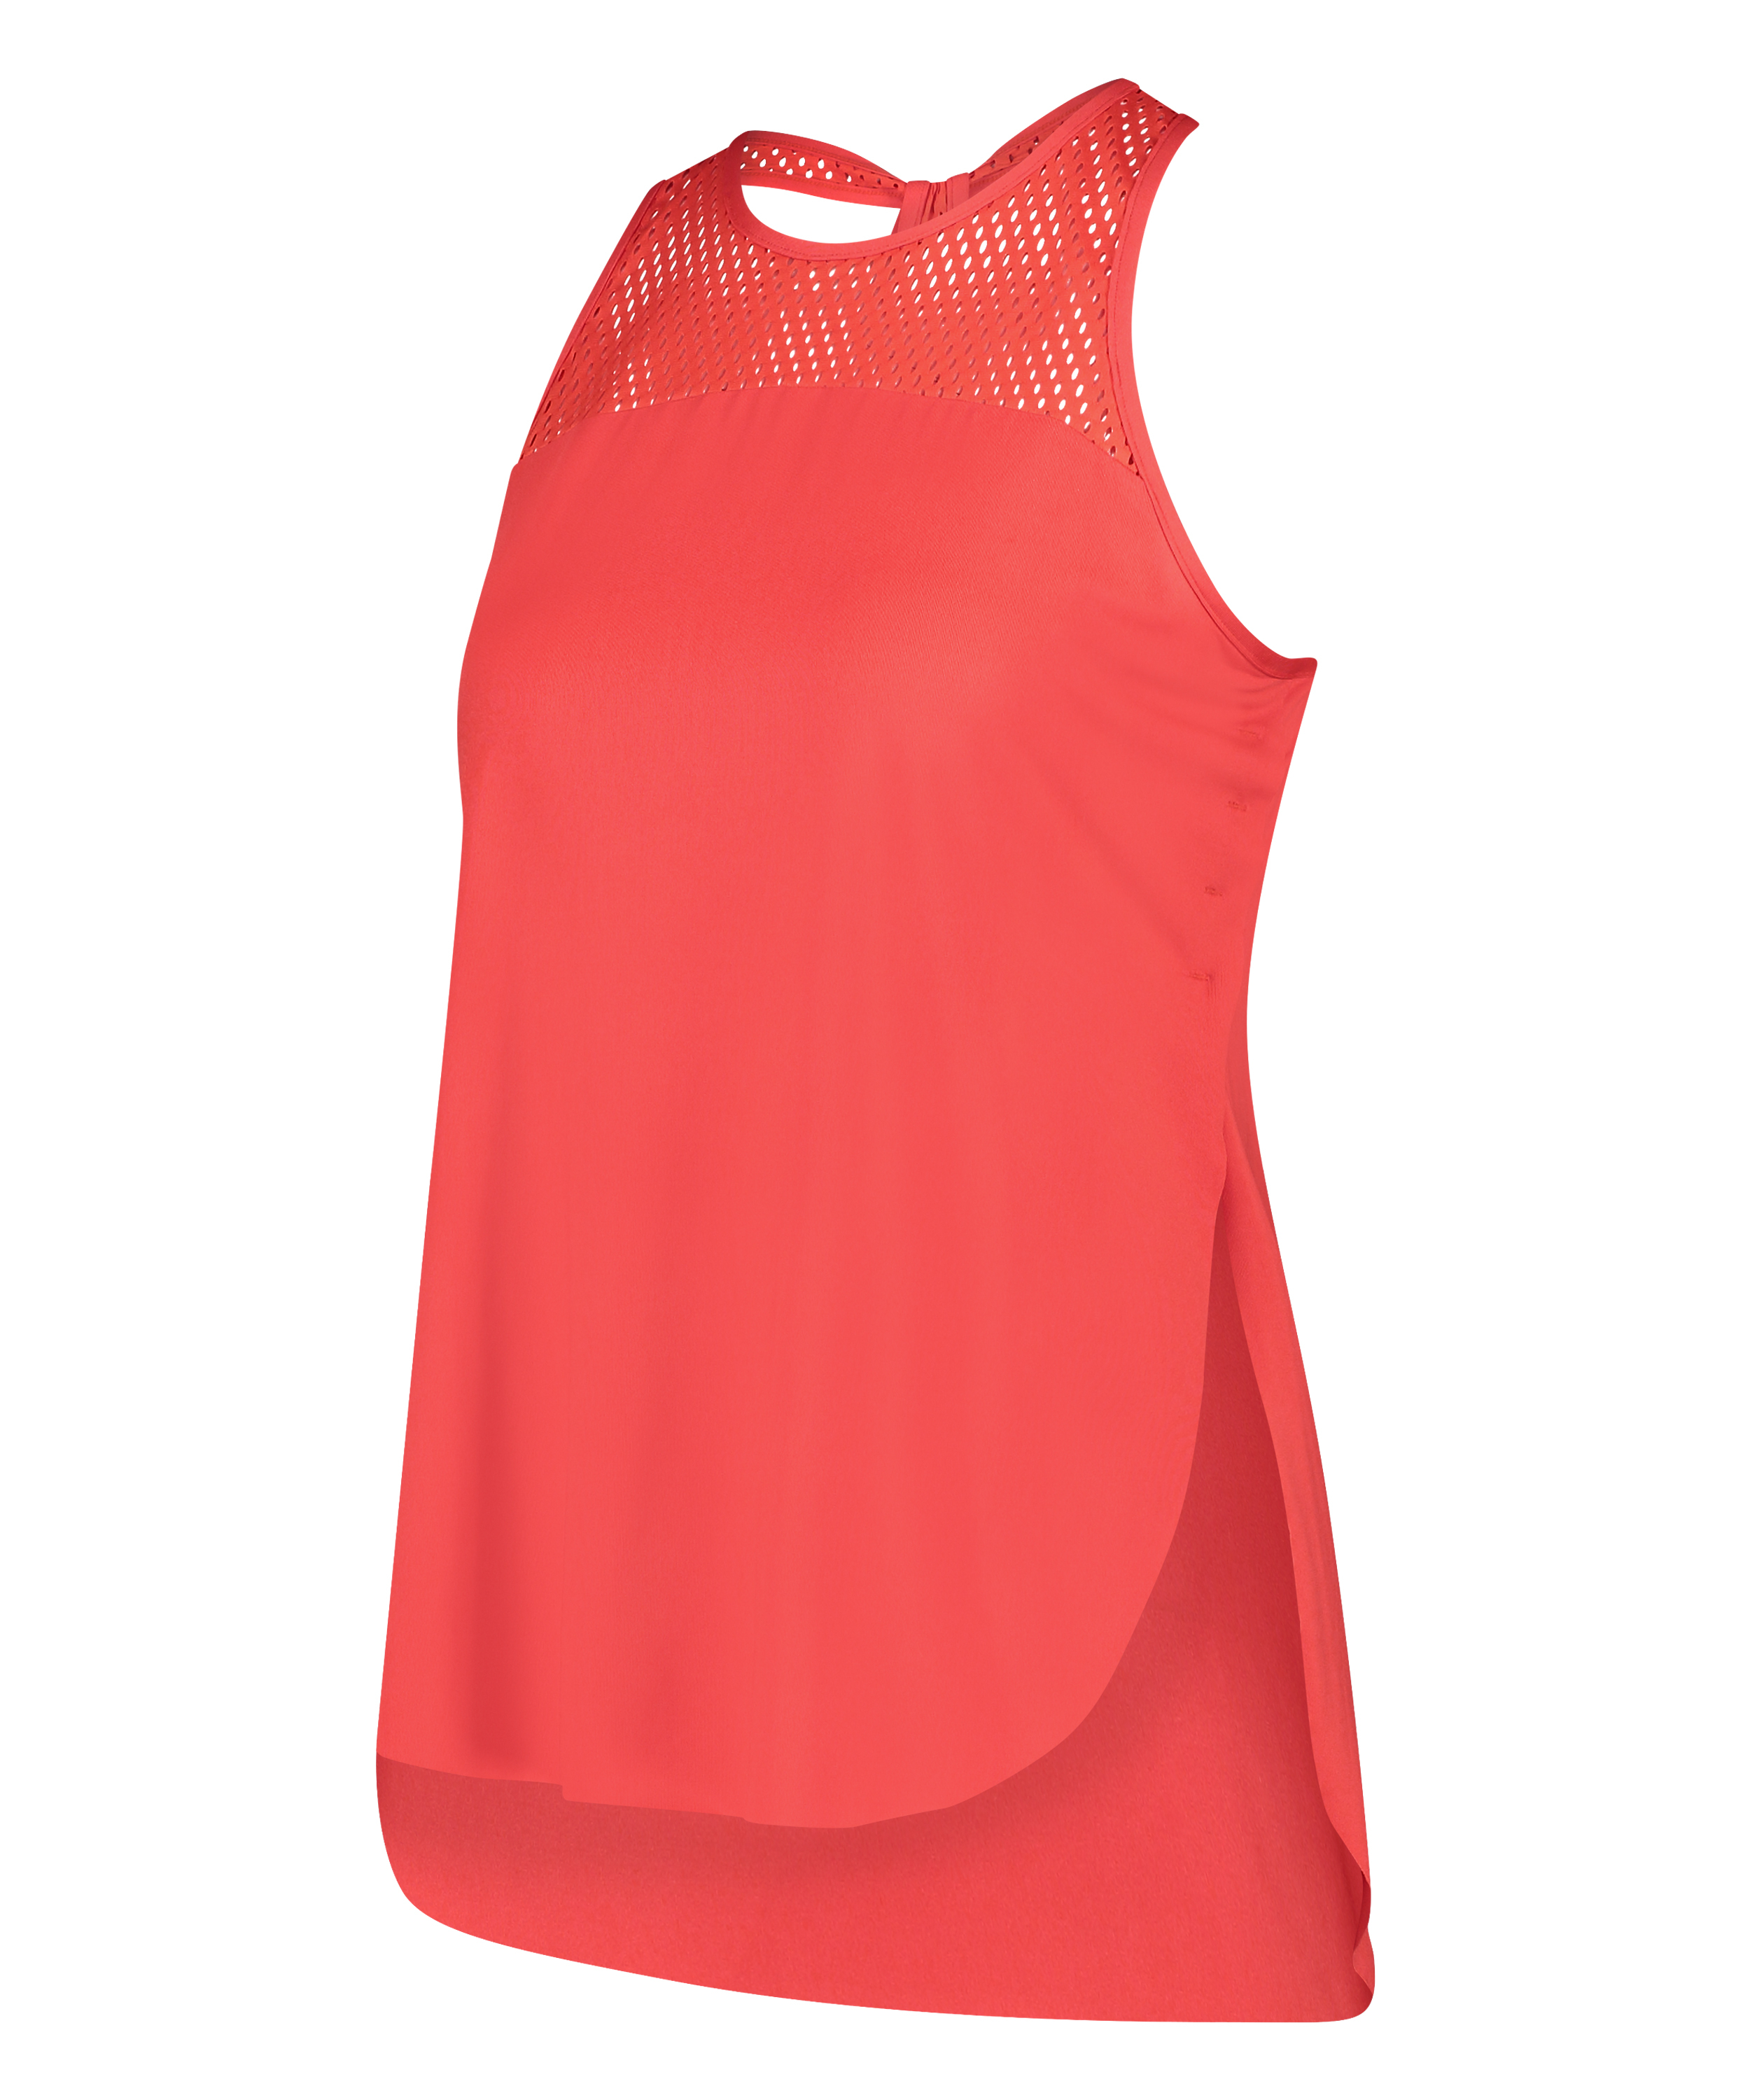 HKMX Tank top Performance, Red, main